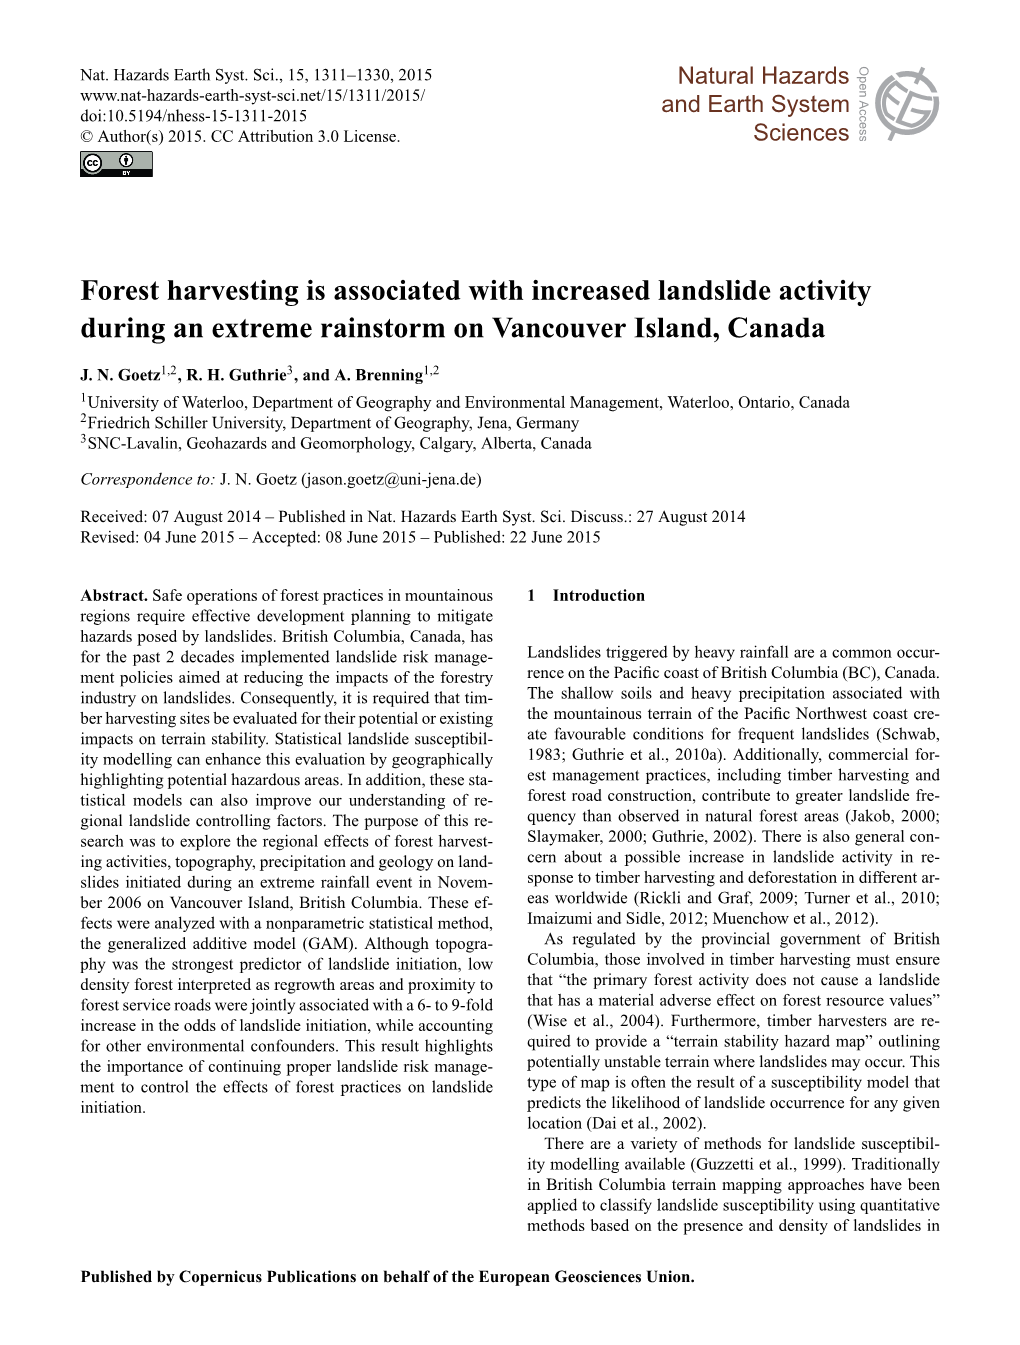 Forest Harvesting Is Associated with Increased Landslide Activity During an Extreme Rainstorm on Vancouver Island, Canada